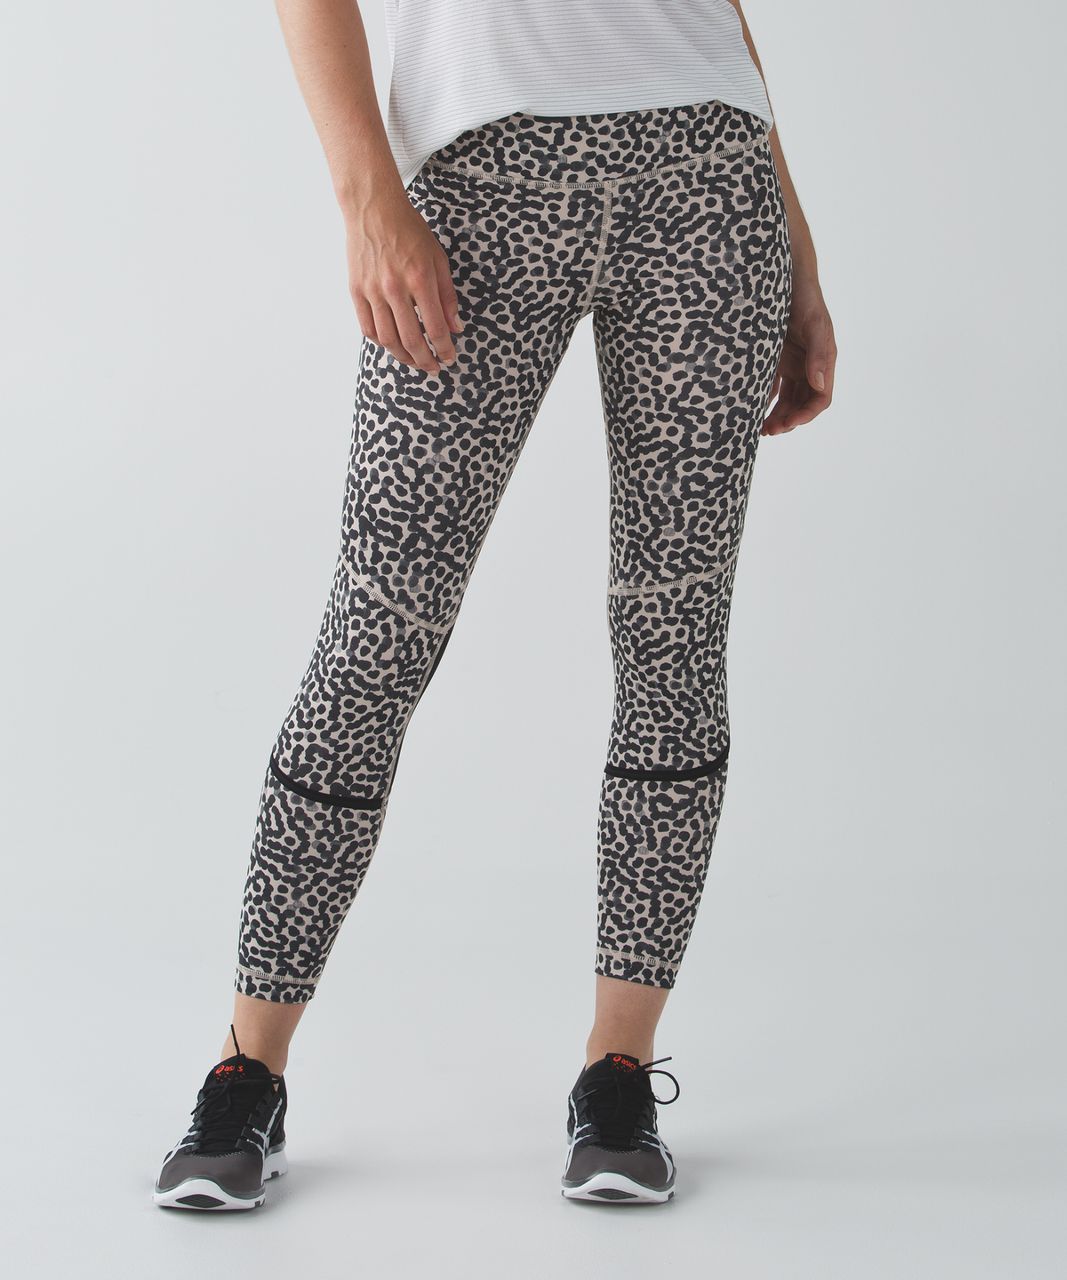 Lululemon Pedal To The Medal 7/8 Tight *Full-On Luxtreme - Ace Spot Grain Black / Black